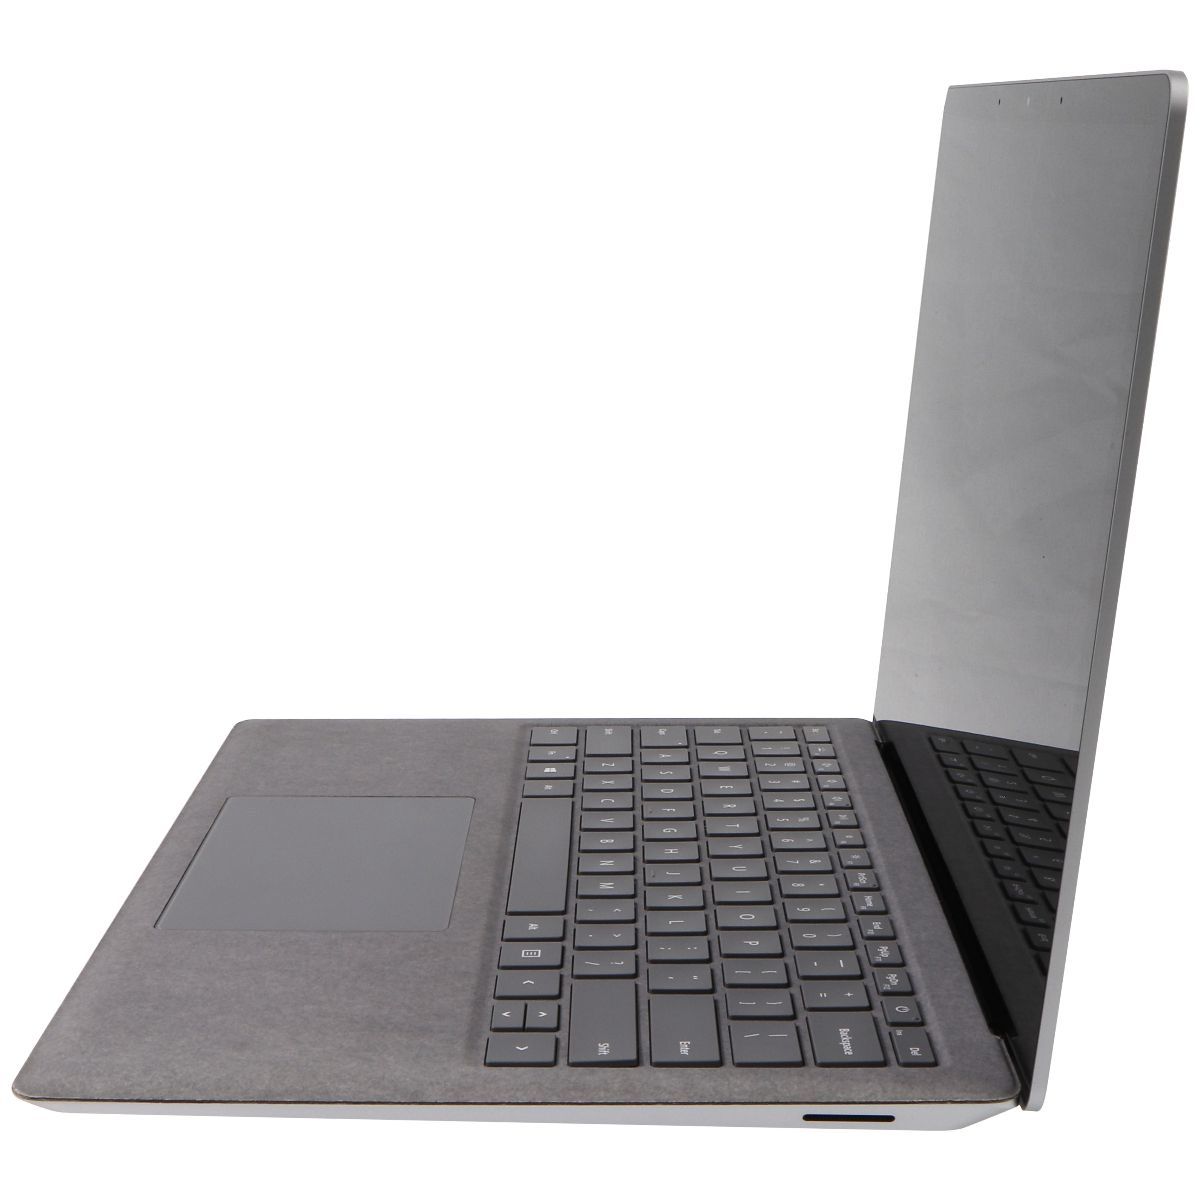 Microsoft Surface Laptop 3 (13.5-in Touch) 1867 (i5-1035/256GB SSD/8GB) Platinum Laptops - PC Laptops & Netbooks Microsoft    - Simple Cell Bulk Wholesale Pricing - USA Seller